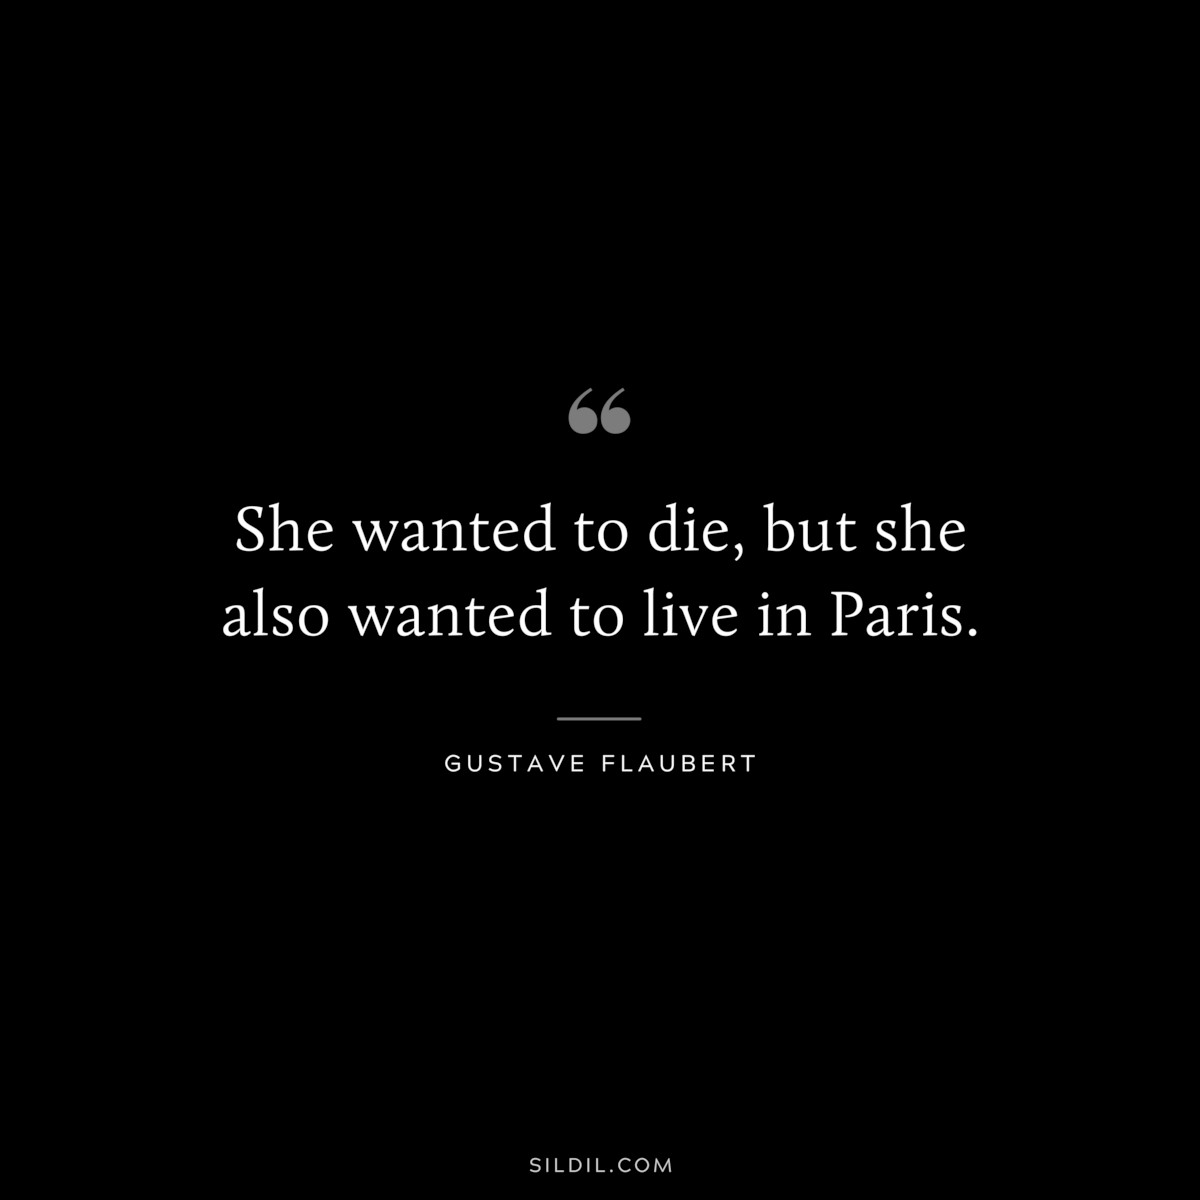 She wanted to die, but she also wanted to live in Paris. ― Gustave Flaubert